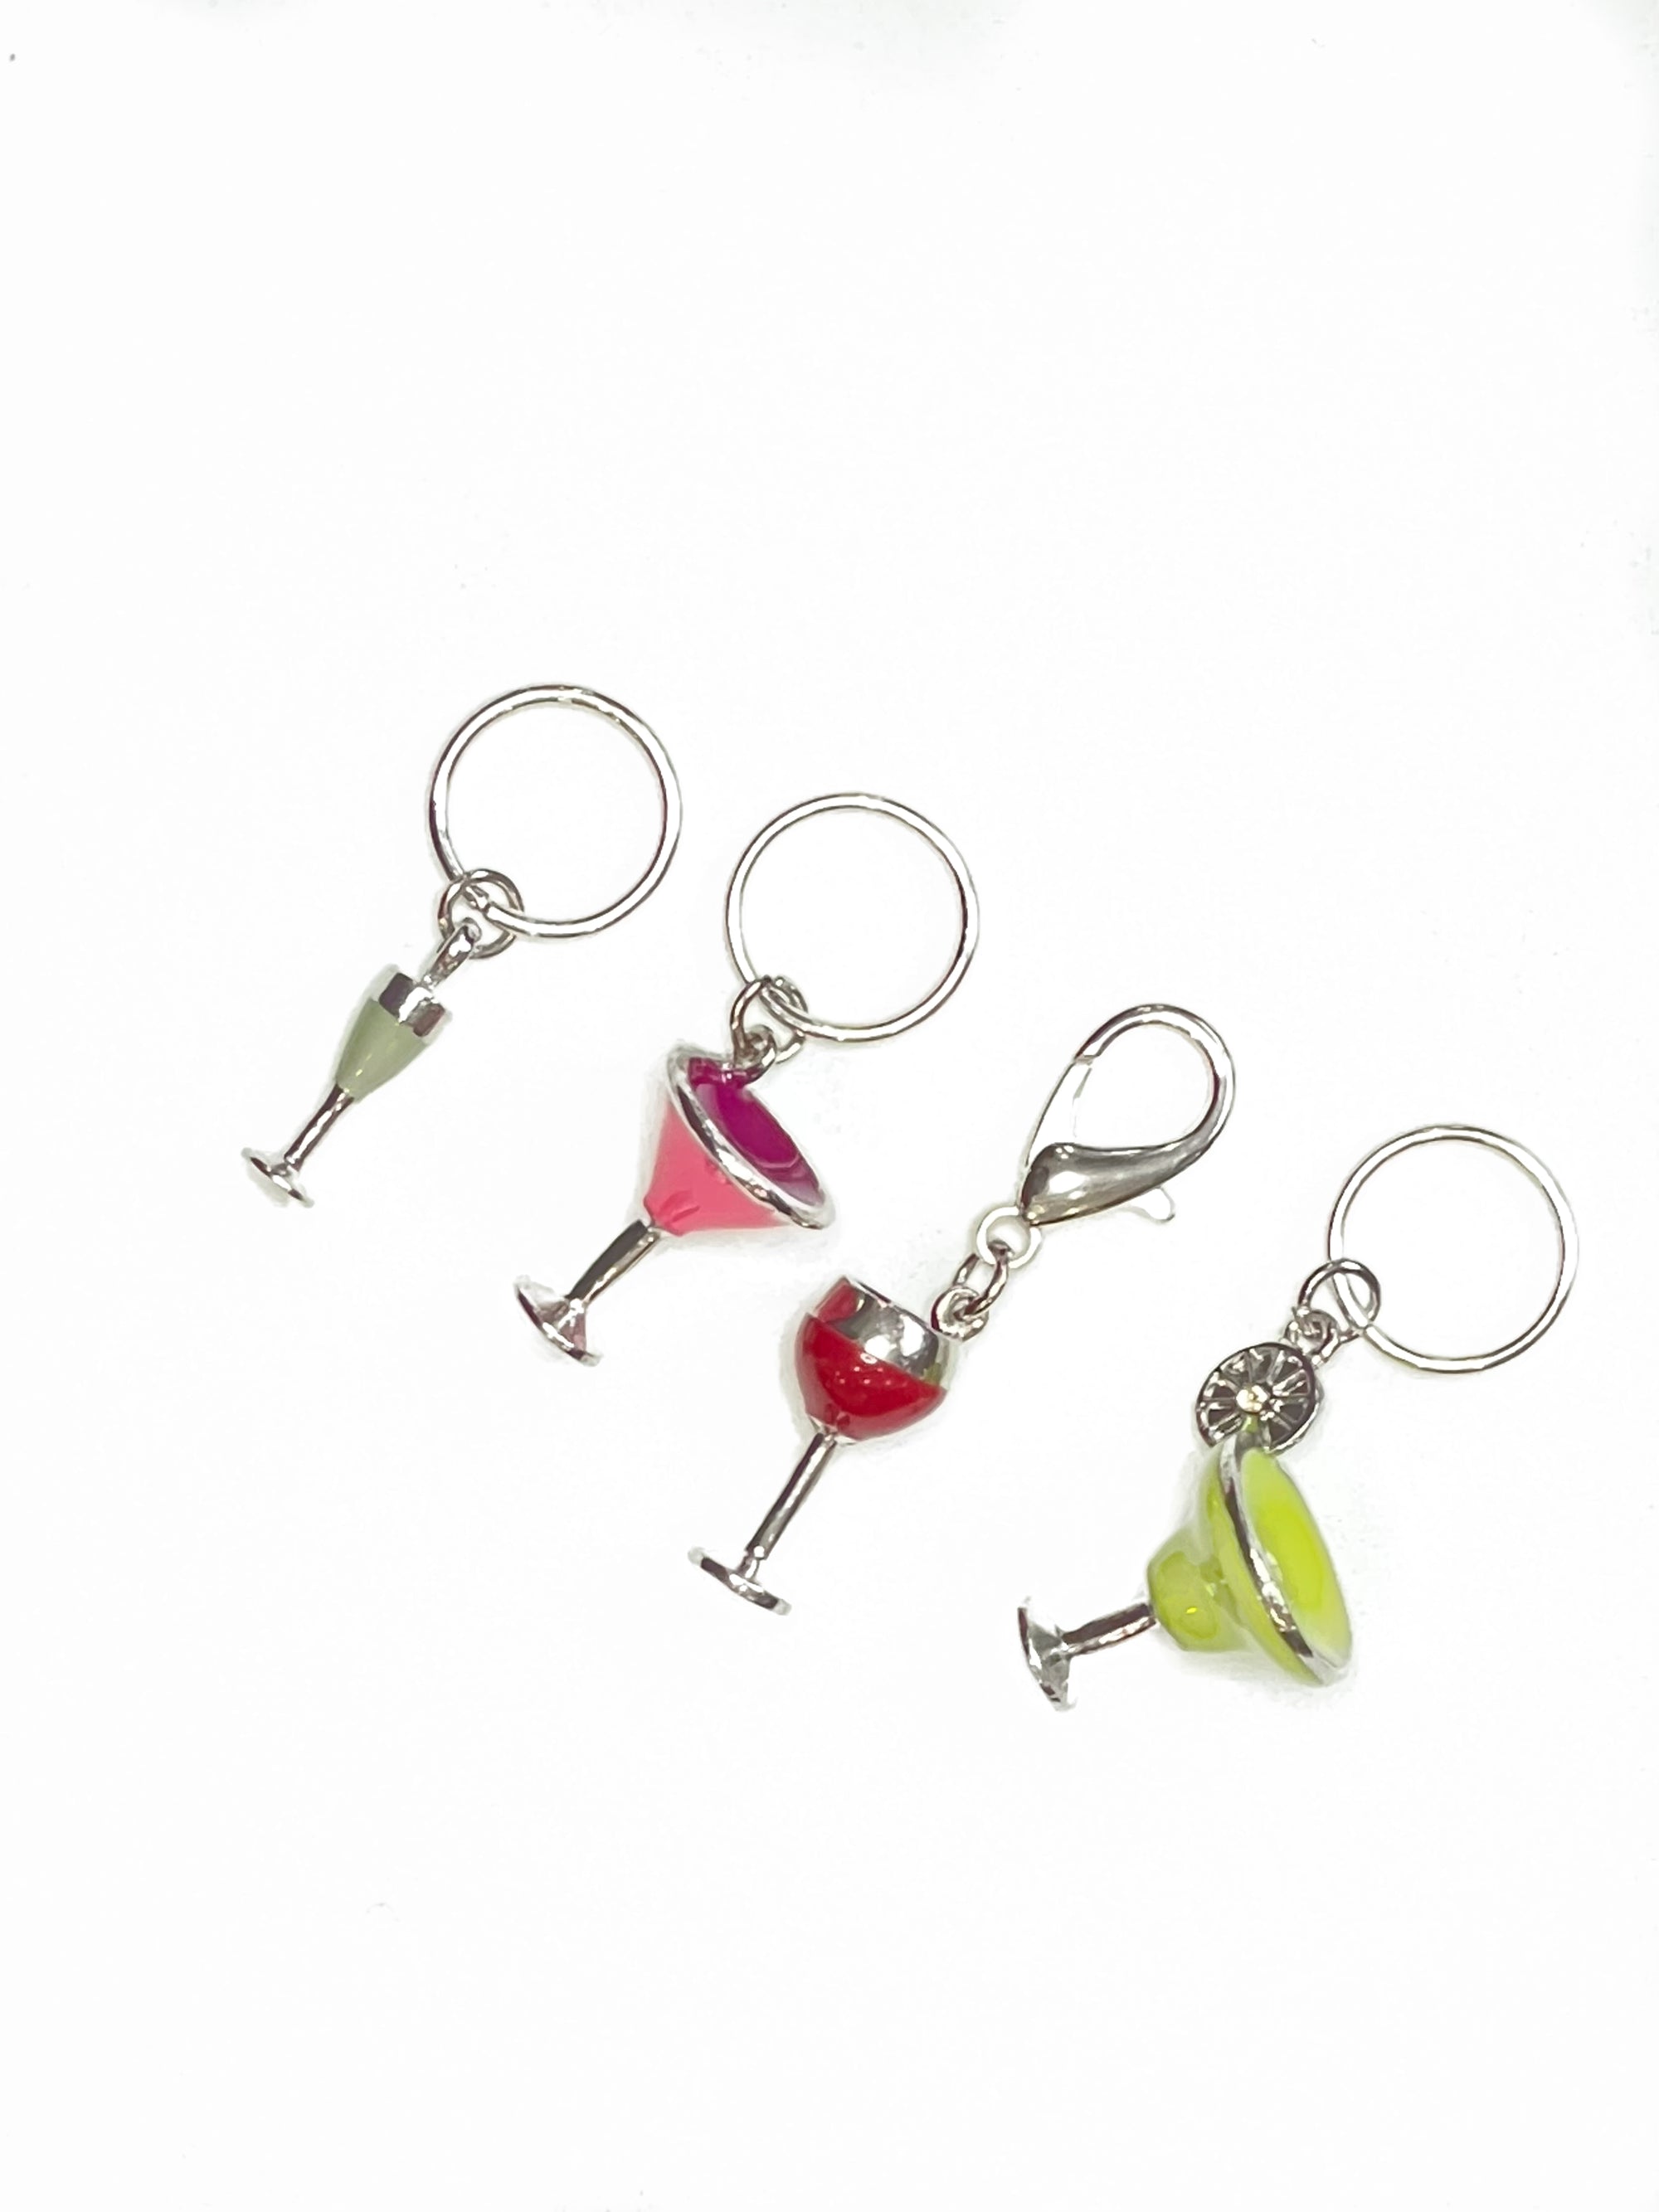 Southpaw Stitch Markers | Cocktail Hour